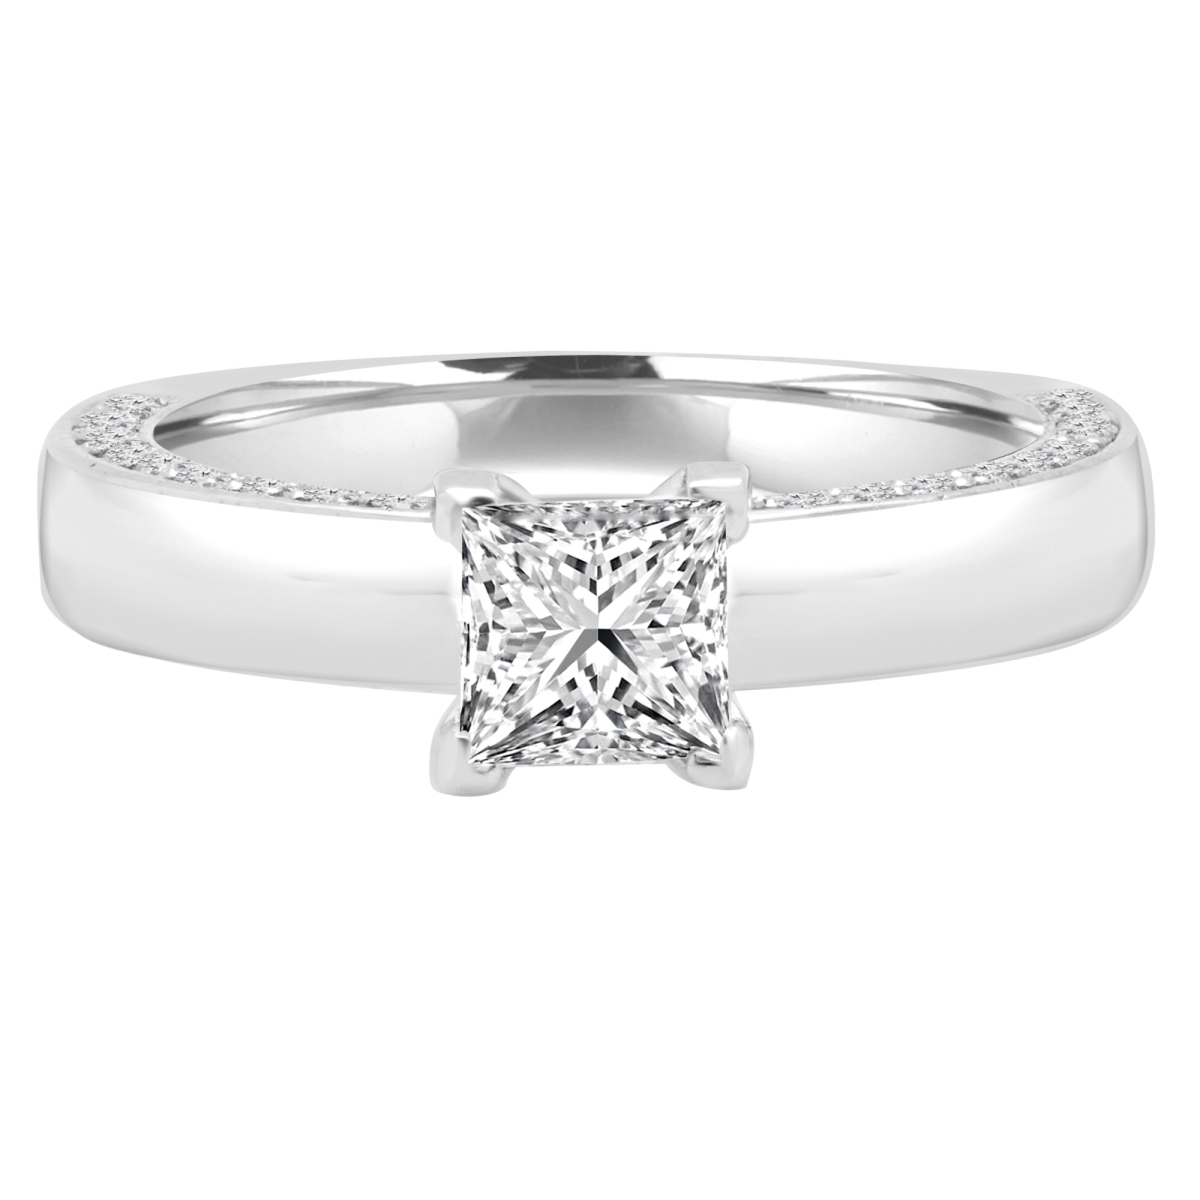 Picture of Majesty Diamonds MD190218-P 1.125 CTW Princess Diamond Solitaire with Accents Engagement Ring in 14K White Gold